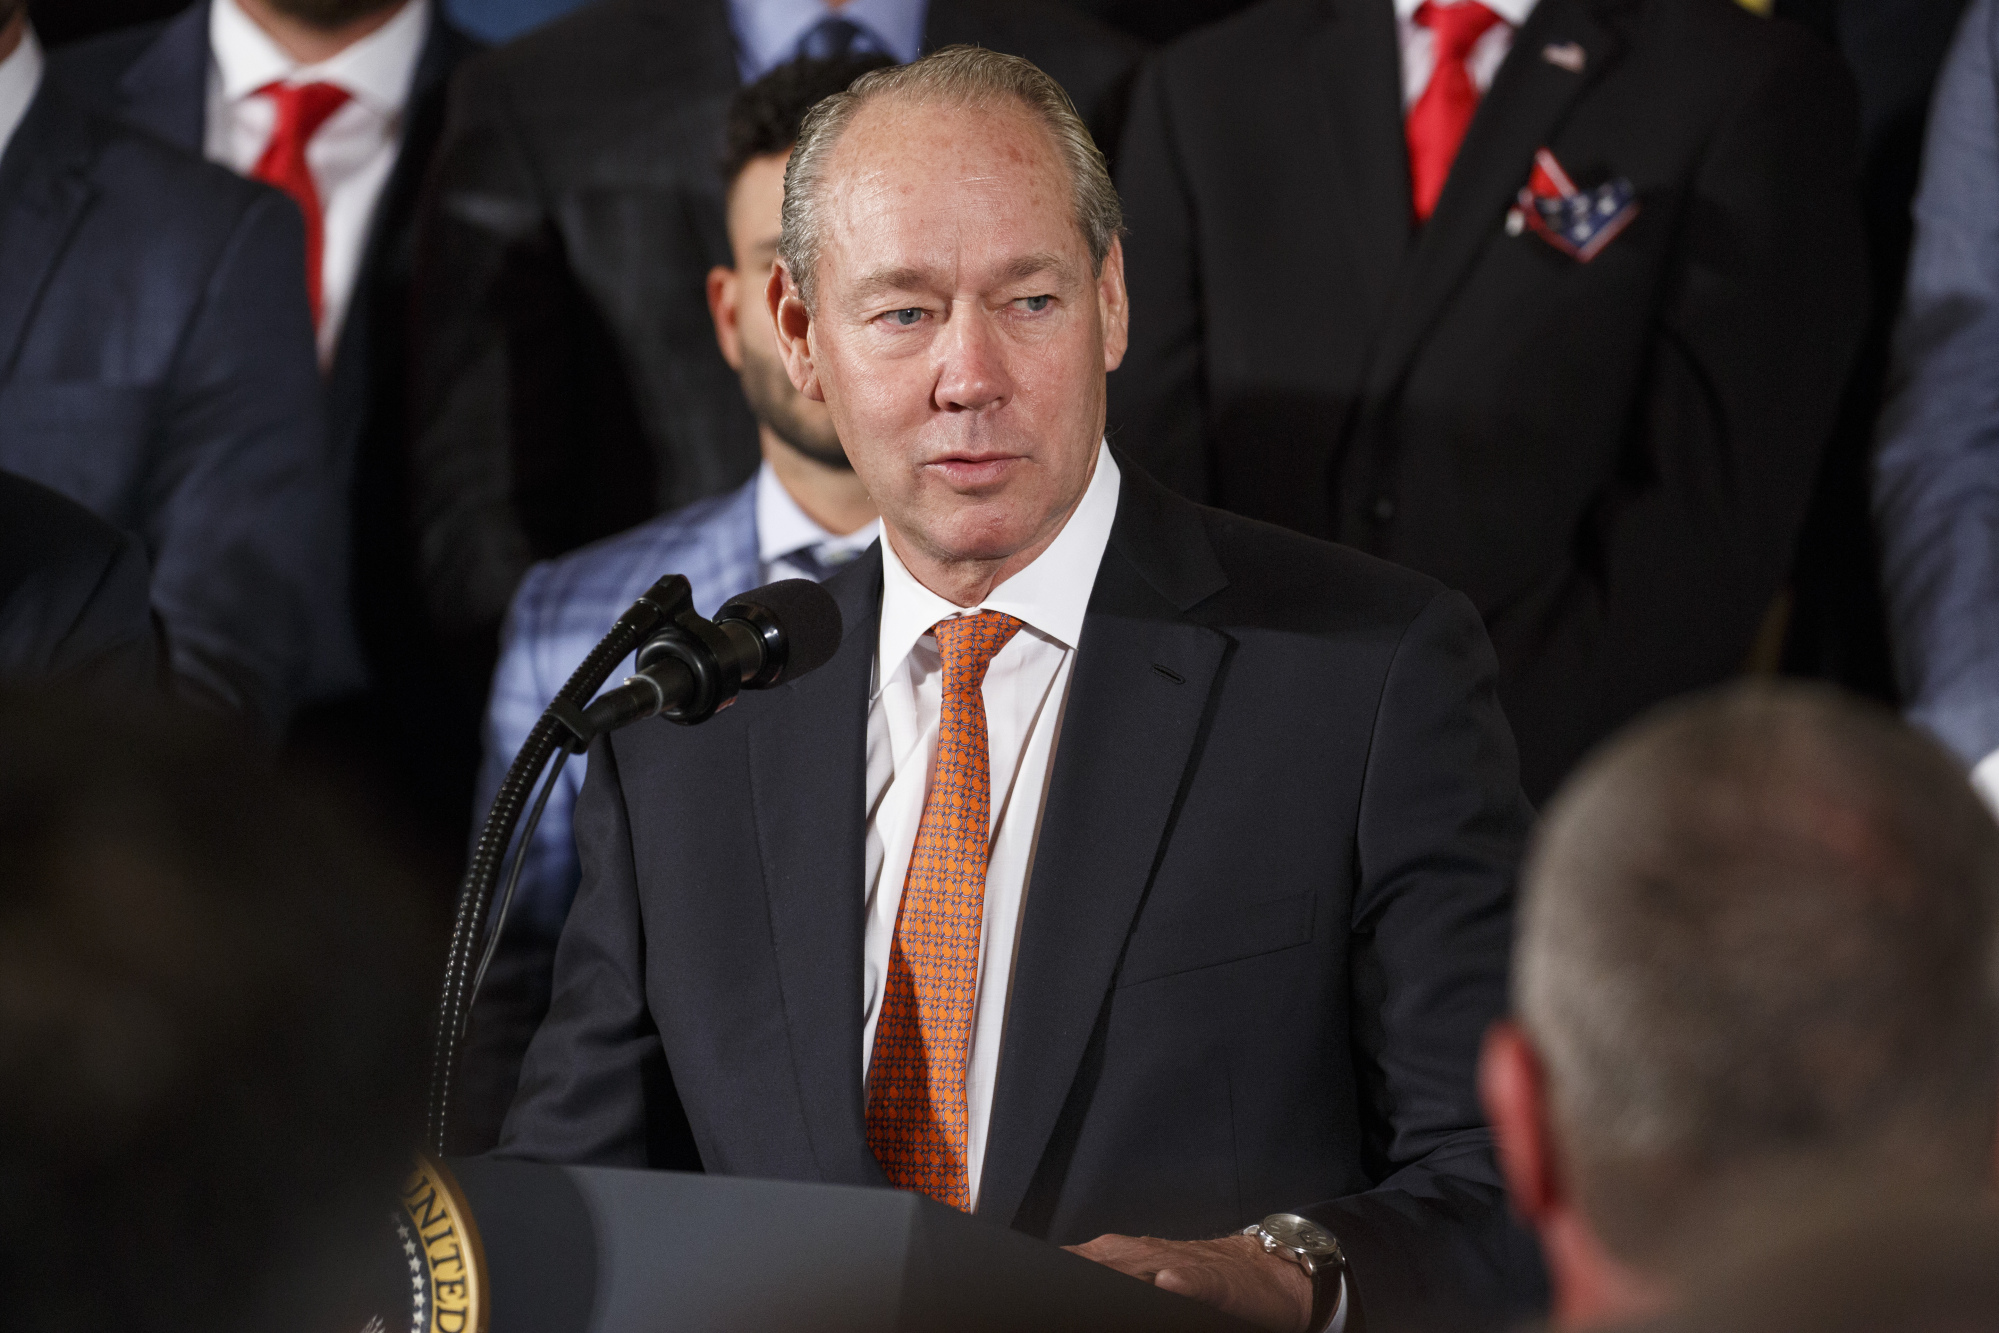 Houston Astros Chairperson Jim Crane provided buses to more than